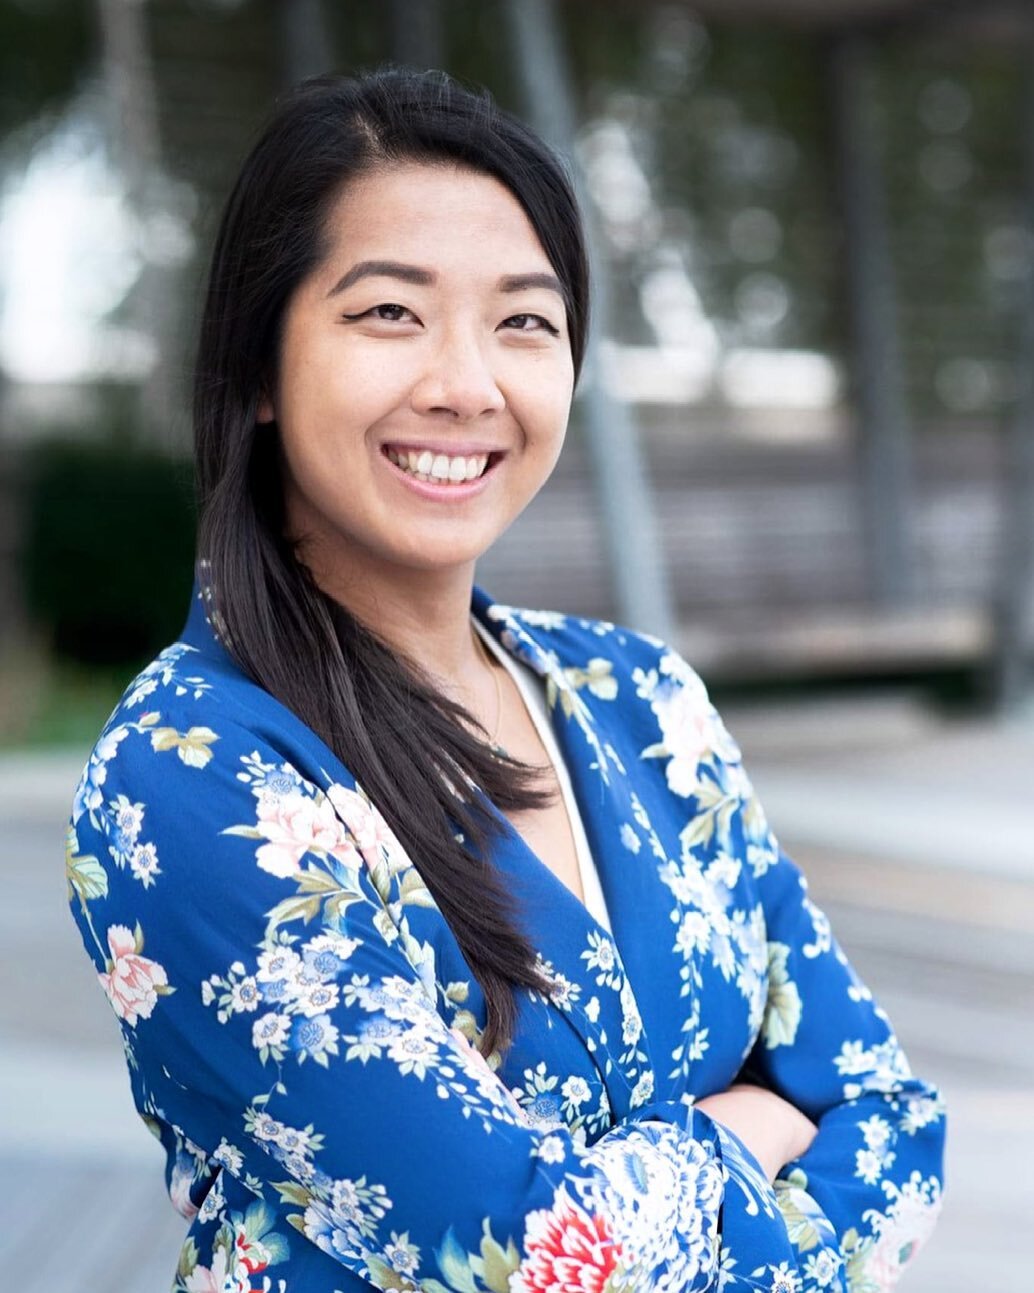 Tesicca Truong 張慈櫻  Trương Từ Anh (she/her) is a community engagement innovator, an anti-oppressive dialogue facilitator, and a serial changemaker. Her passions lie at the intersection of youth empowerment, citizen engagement and resilience building.